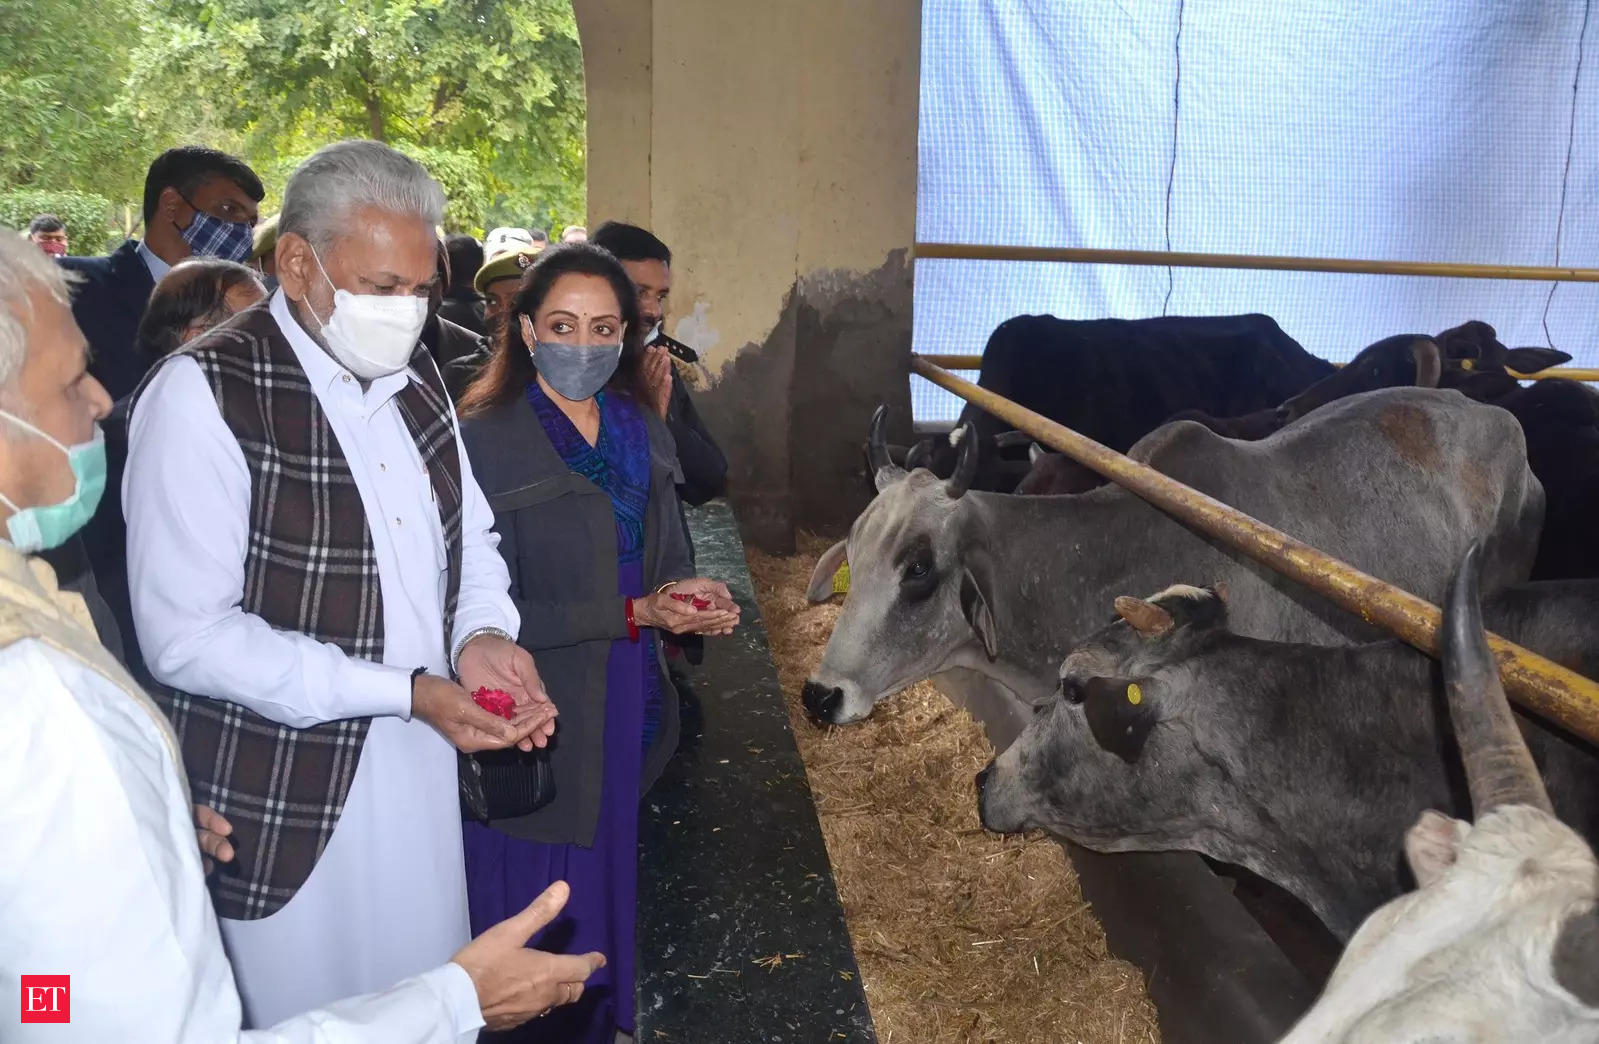 Animal Husbandry | Parshottam Rupala: Urban dwellers need to be connected  to the sector, says Parshottam Rupala, Minister of Fisheries, Animal  Husbandry and Dairying